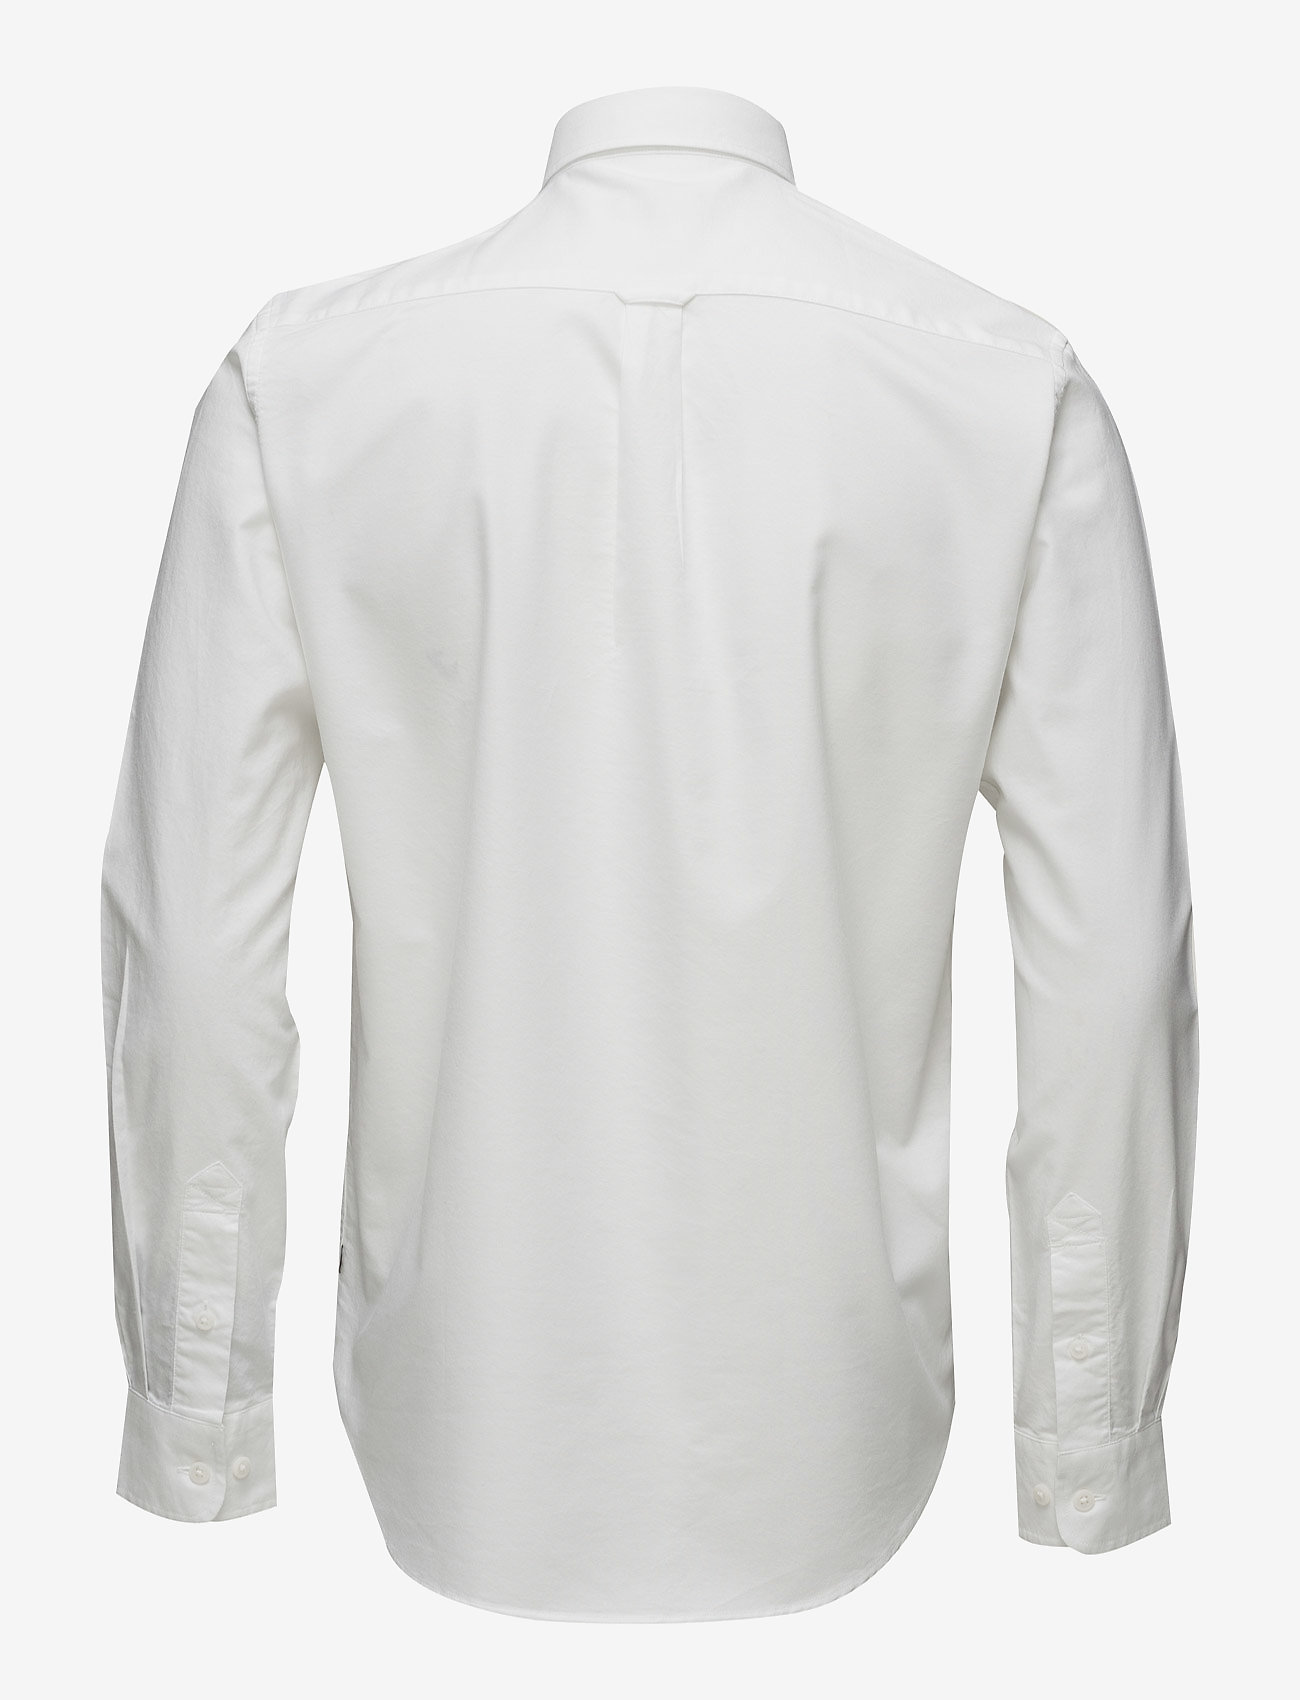 Matinique - Jude - oxford shirts - white - 1